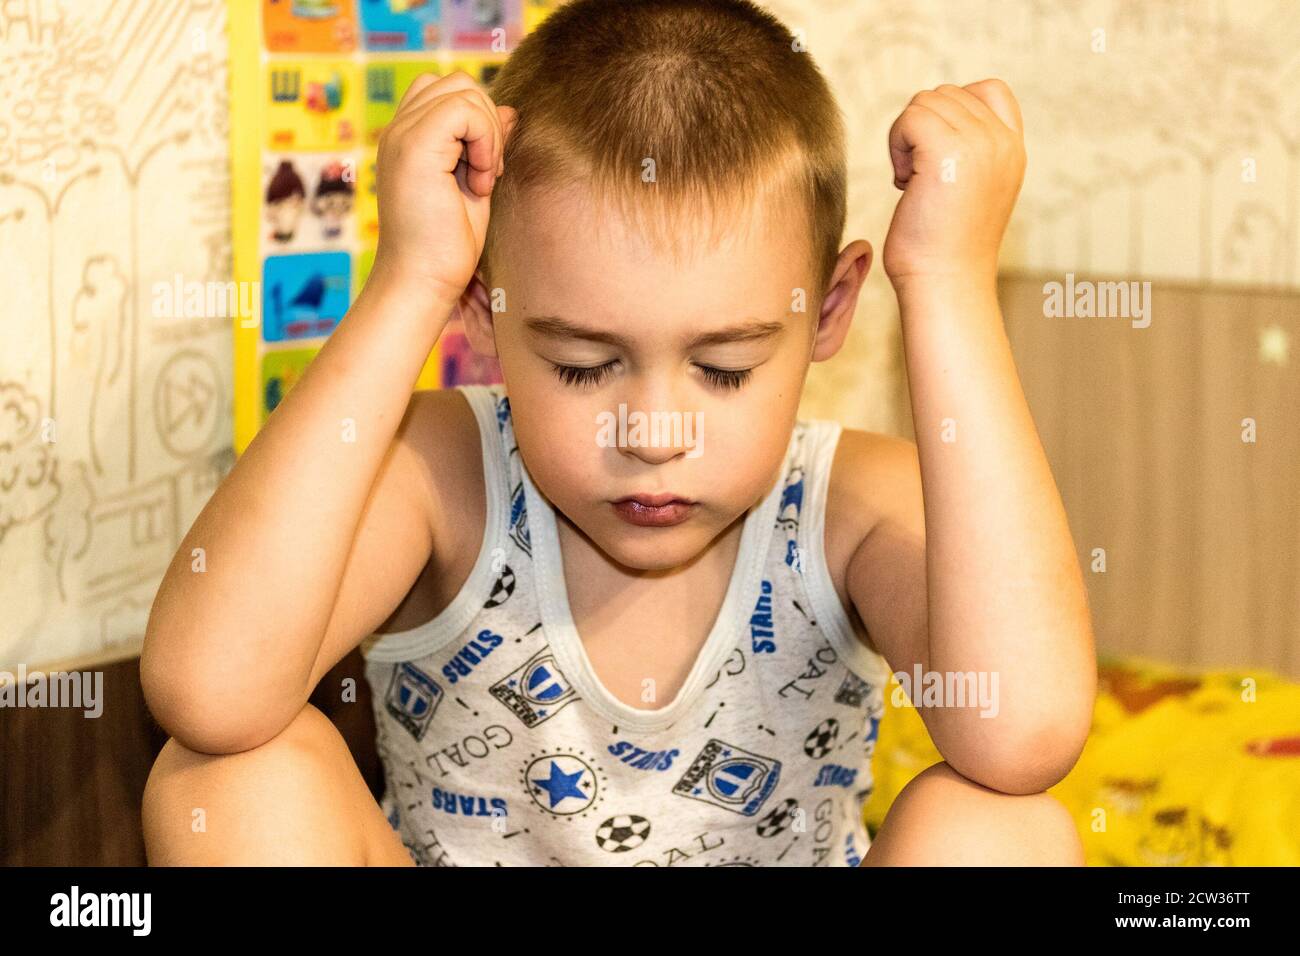 A cute little boy with his eyes closed clutched his hands by his head. Stock Photo